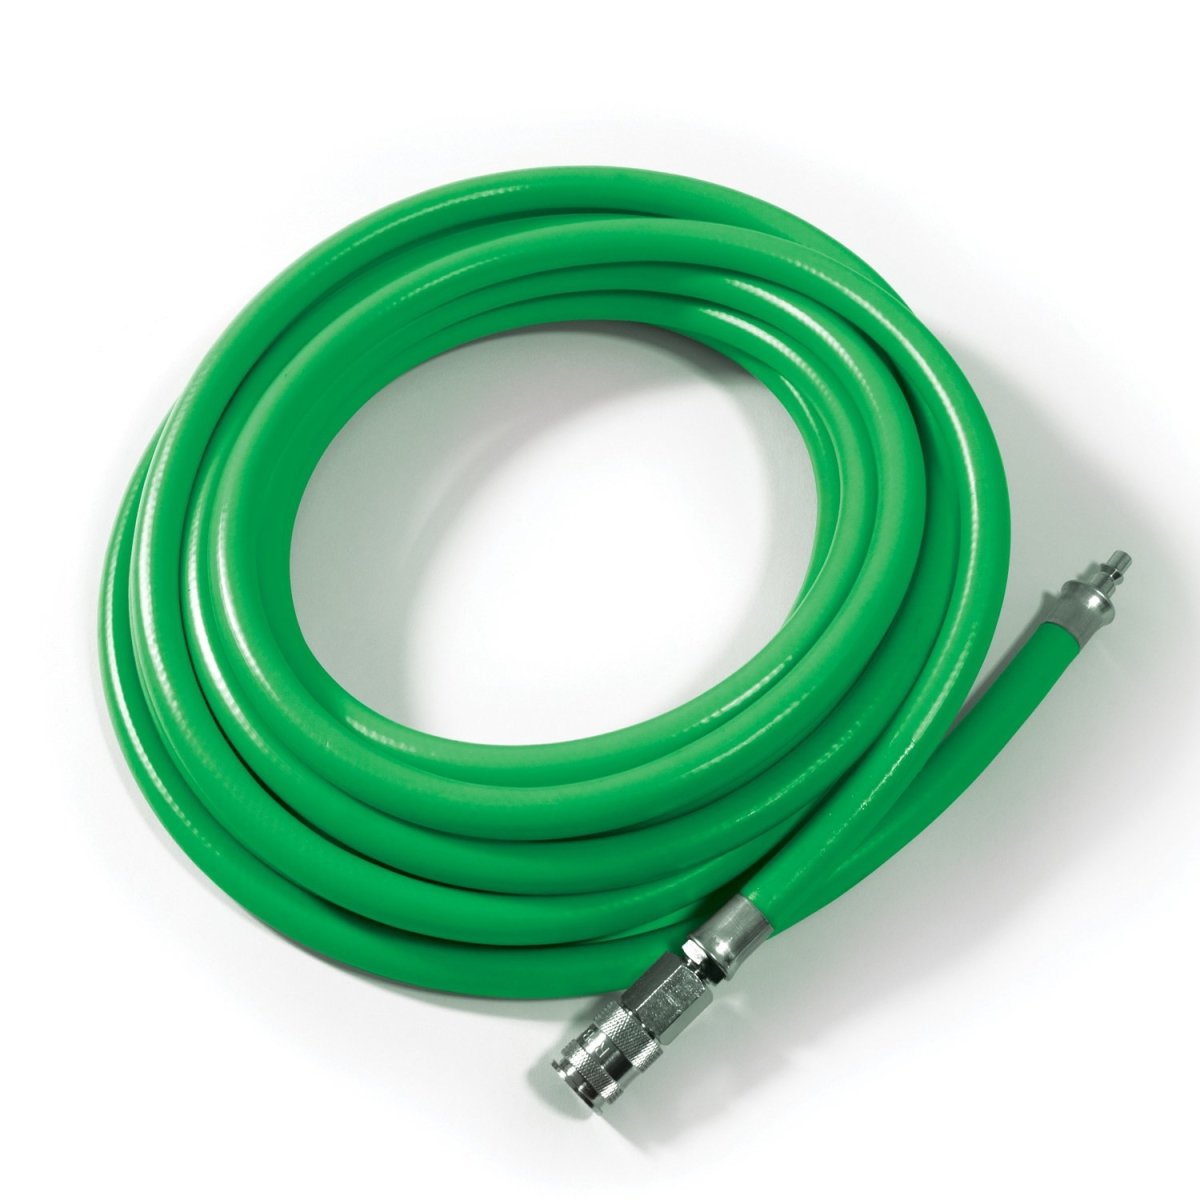 Supplied Breathing Air Lines - Air Supply Hoses for Supplied Air Respirators - RPB Safety